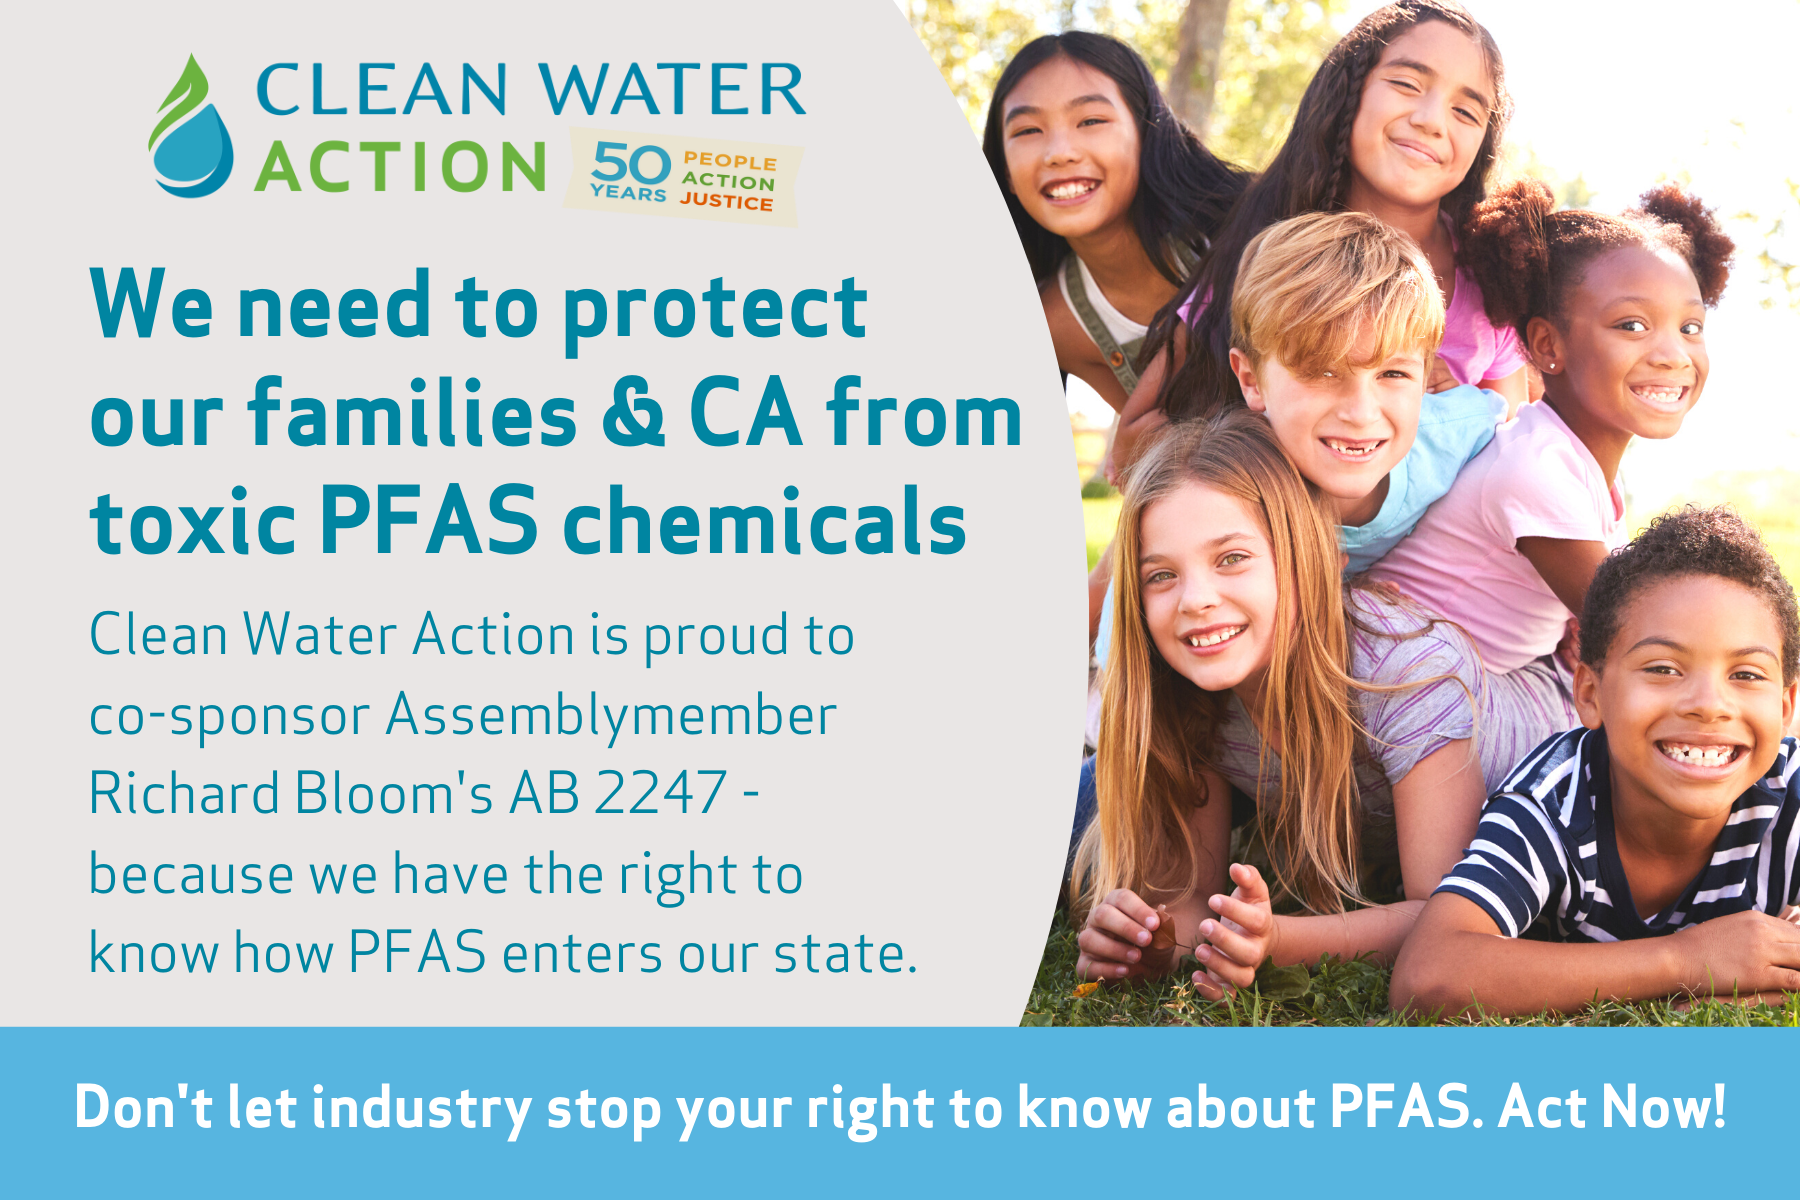 Clean Water Action is proud to co-sponsor Assemblymember Richard Bloom's AB 2247 - because we have t